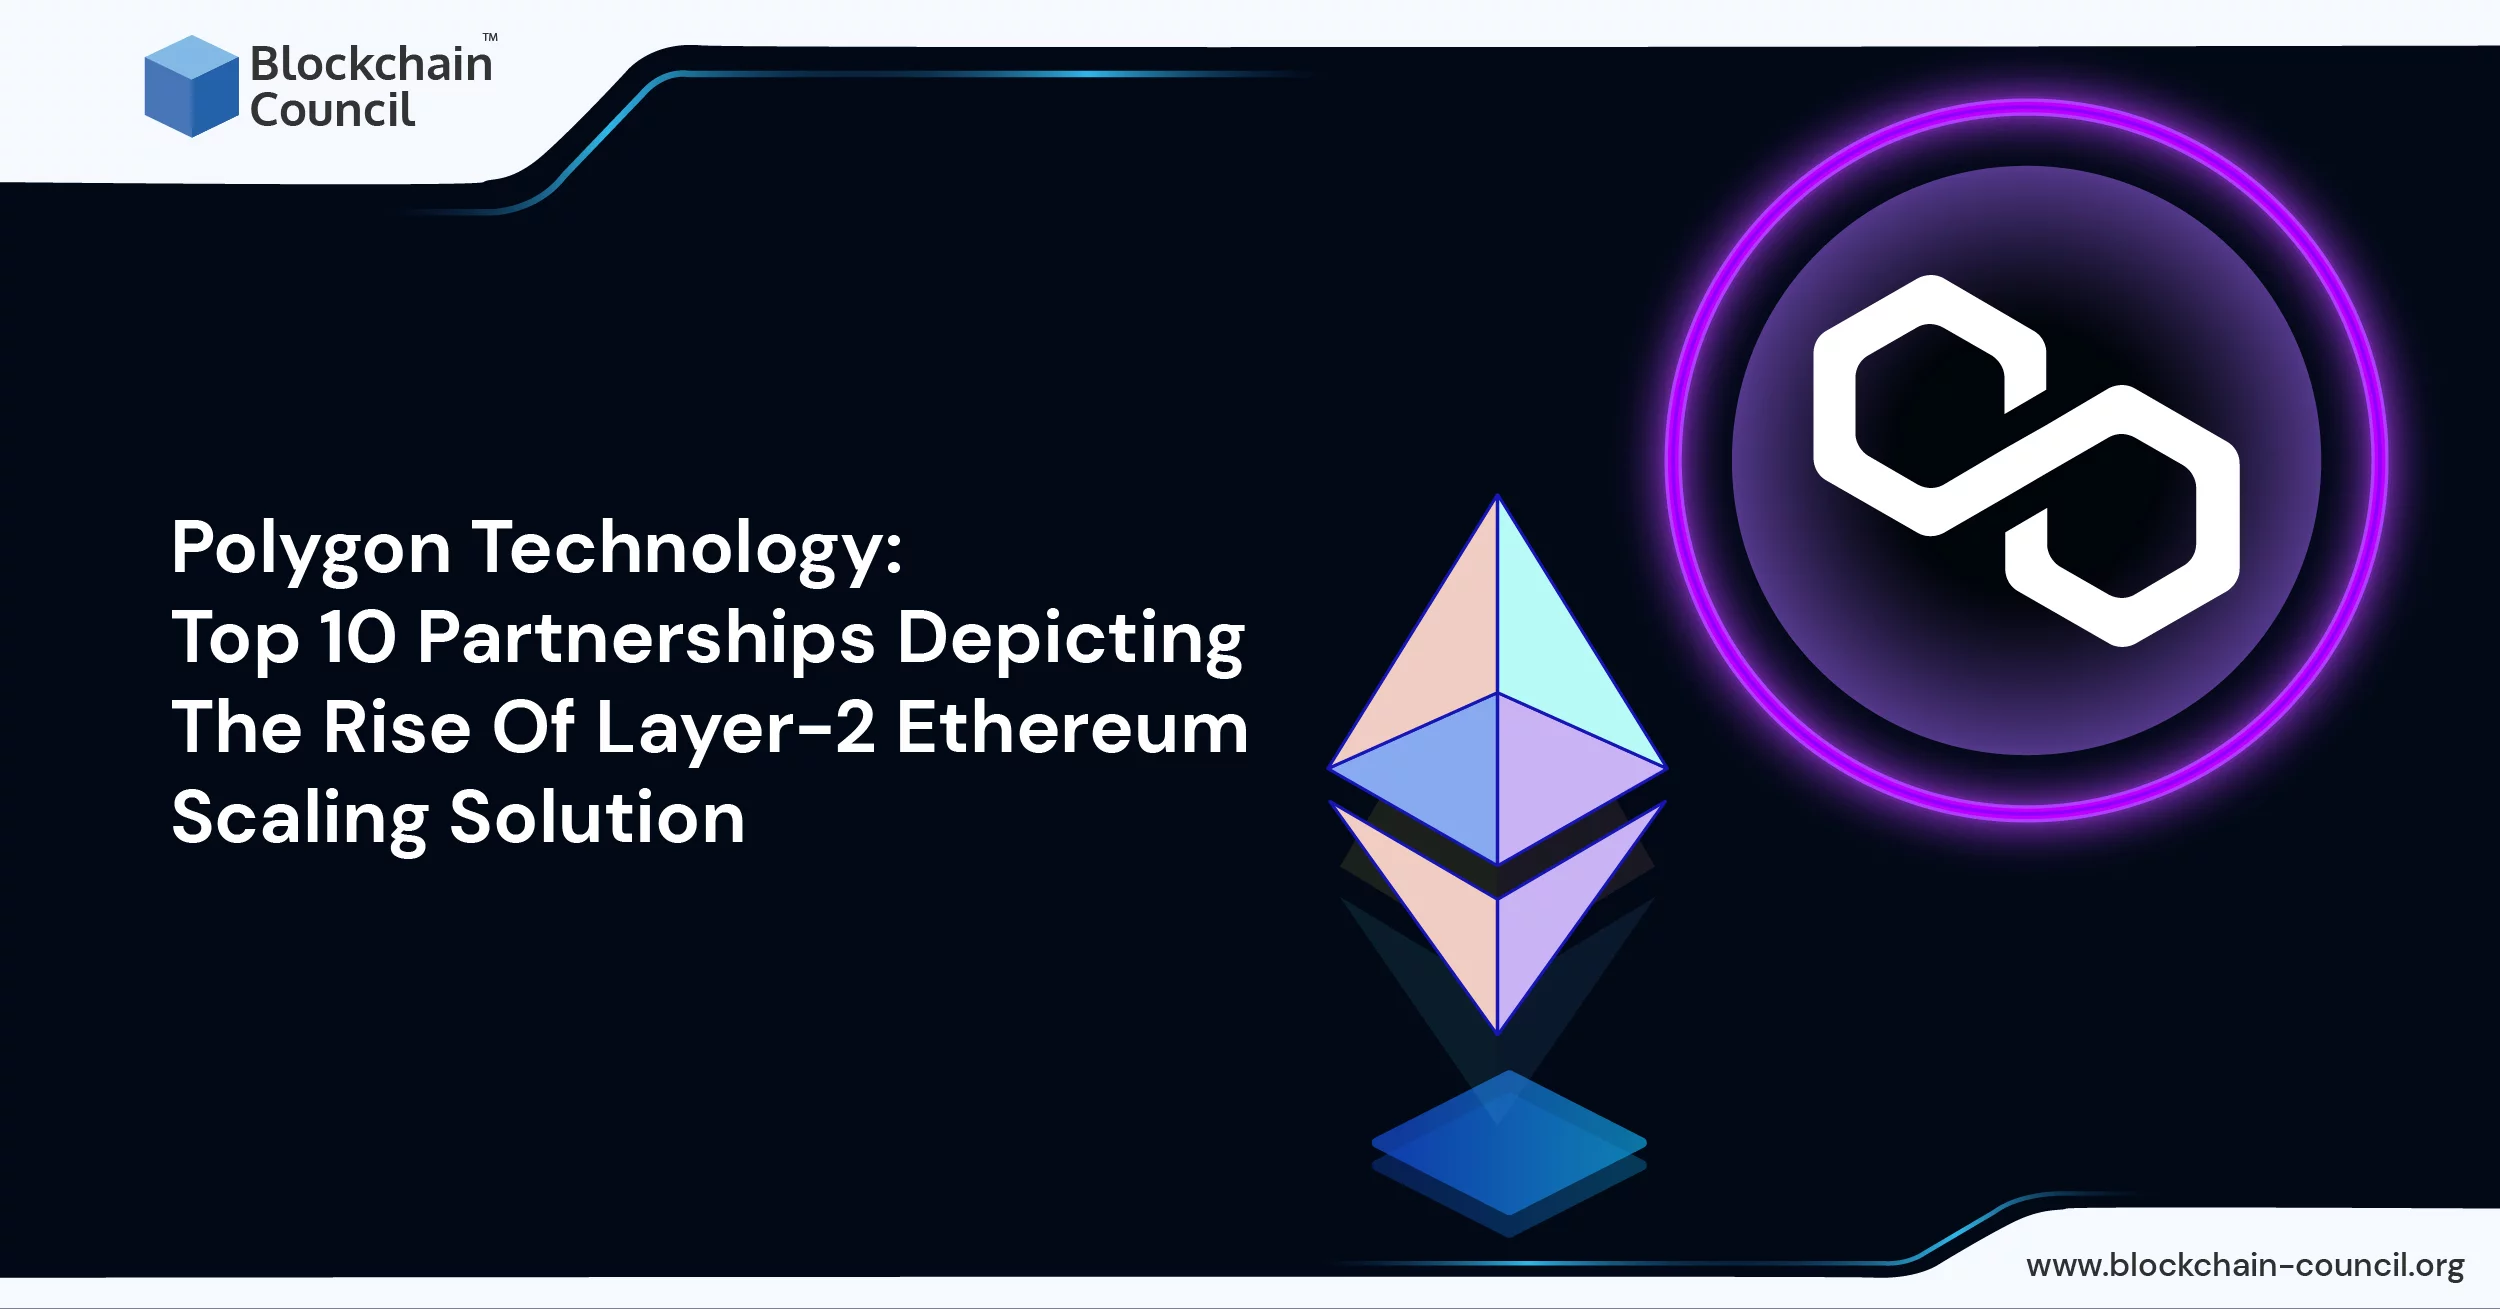 Polygon Technology: Top 10 Partnerships Depicting The Rise Of Layer-2 Ethereum Scaling Solution